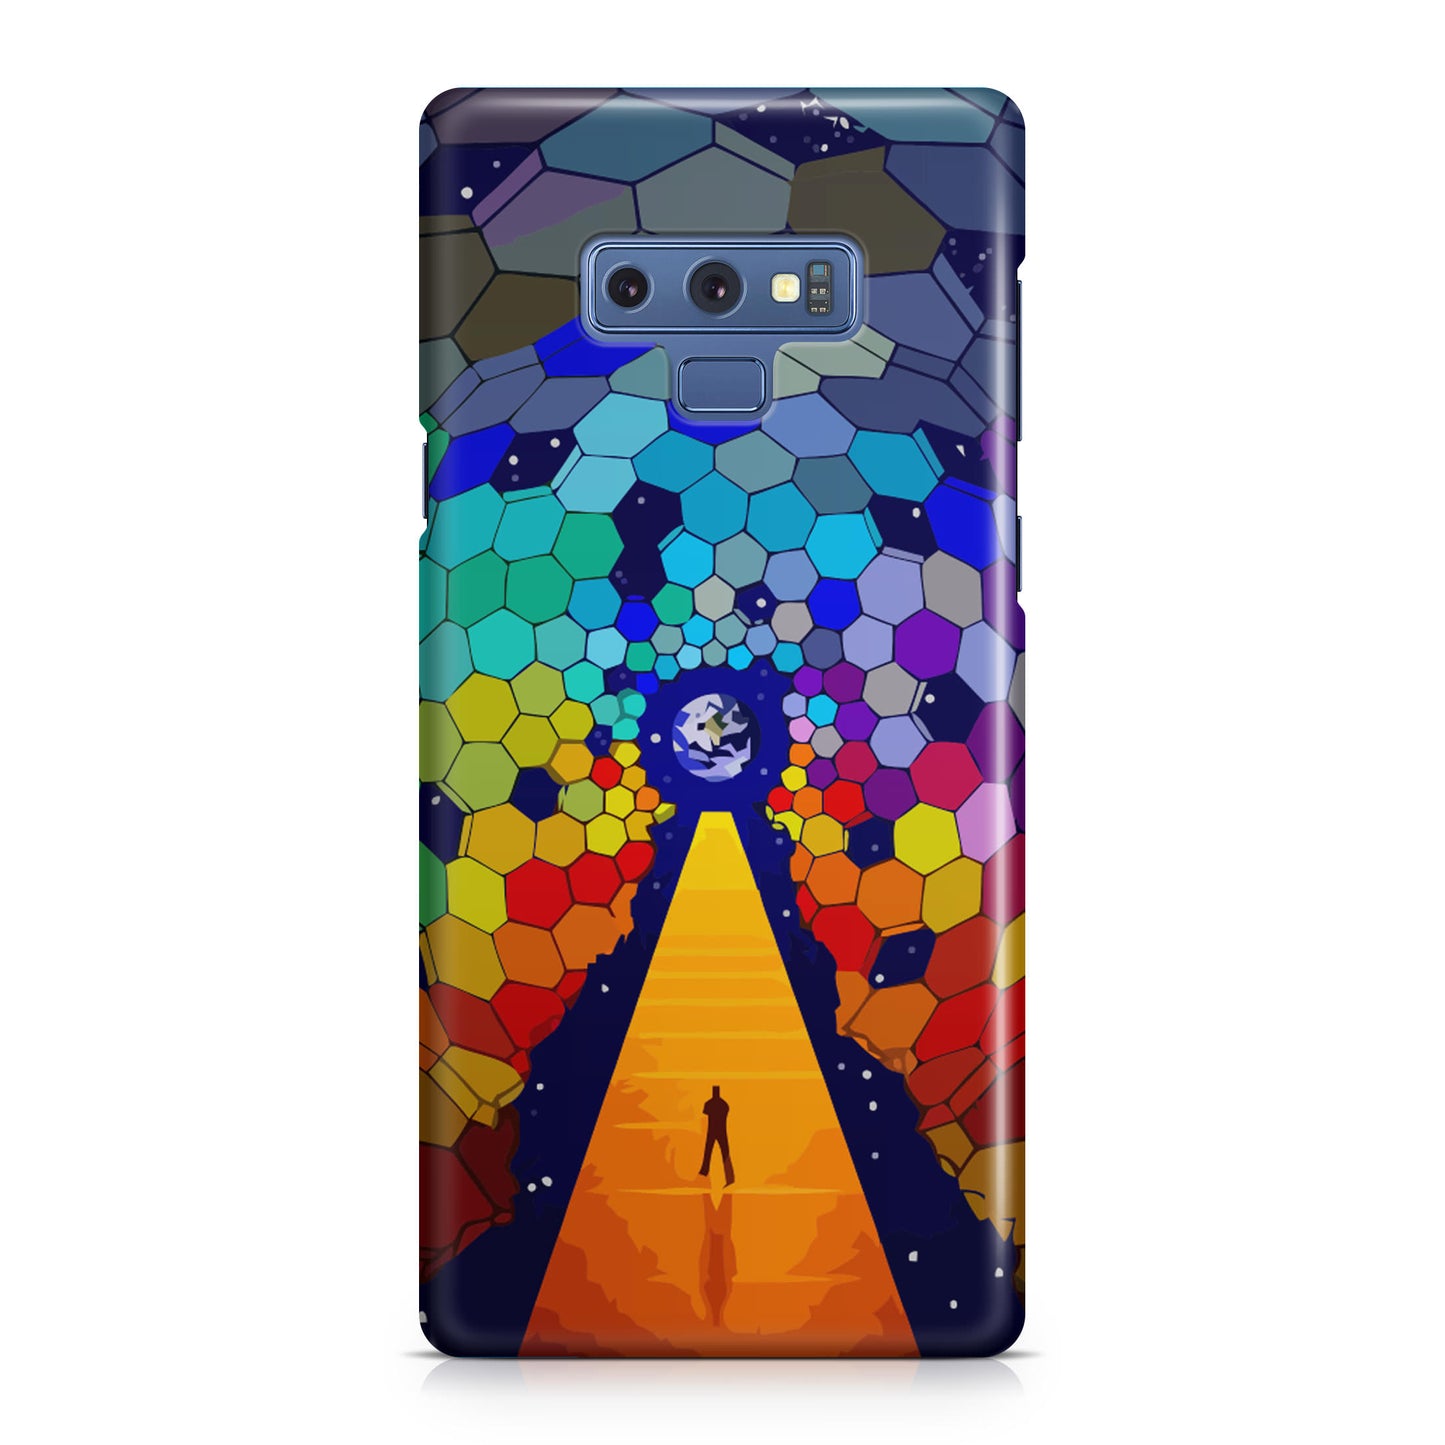 Muse Galaxy Note 9 Case